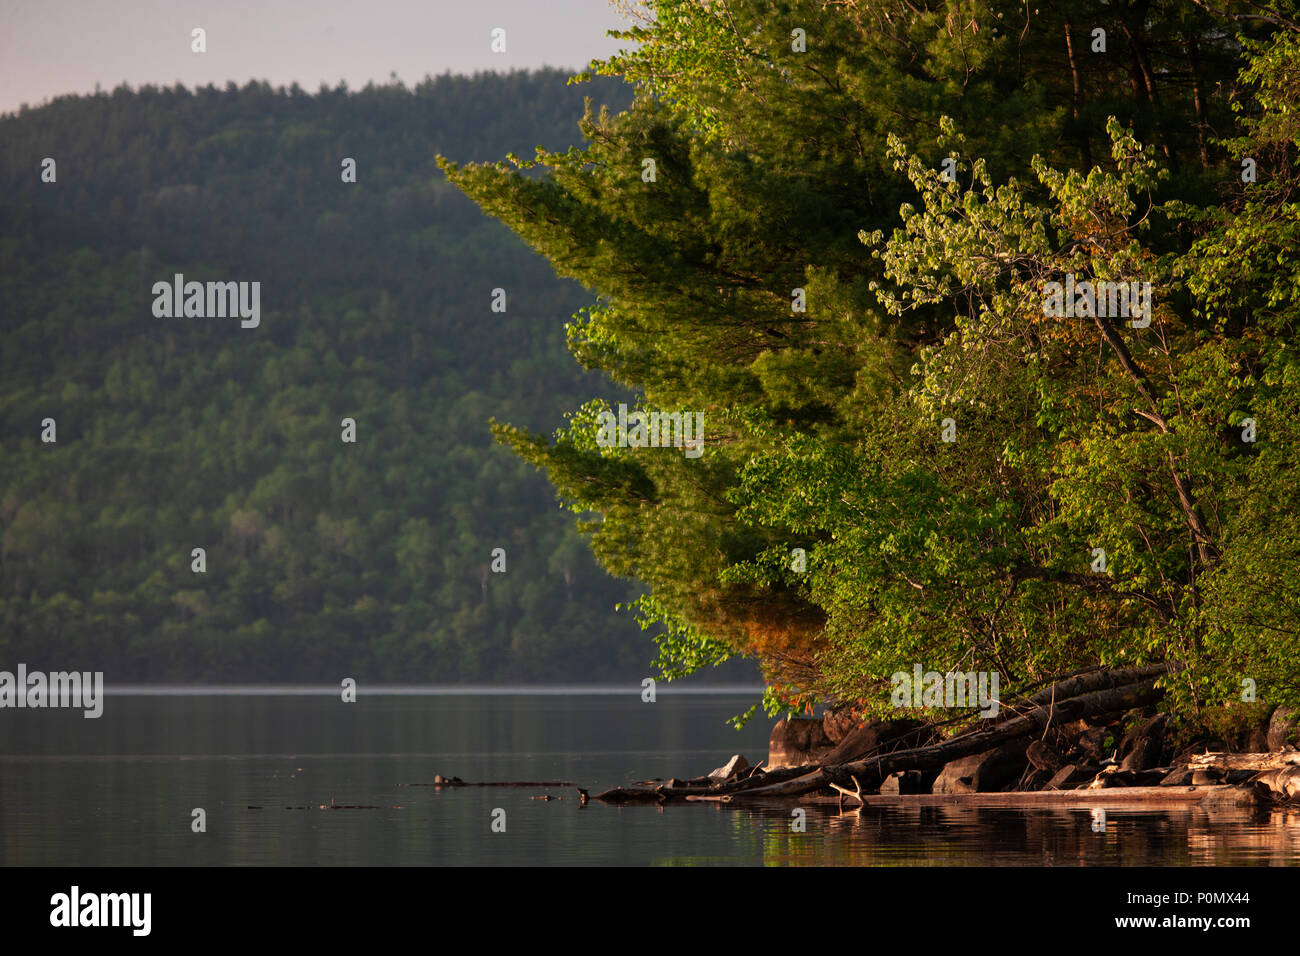 Horizontal pictures of the landscape inside Ontario's Driftwood Provincial Park located along the Ottawa River in Eastern Ontario, Canada. Stock Photo